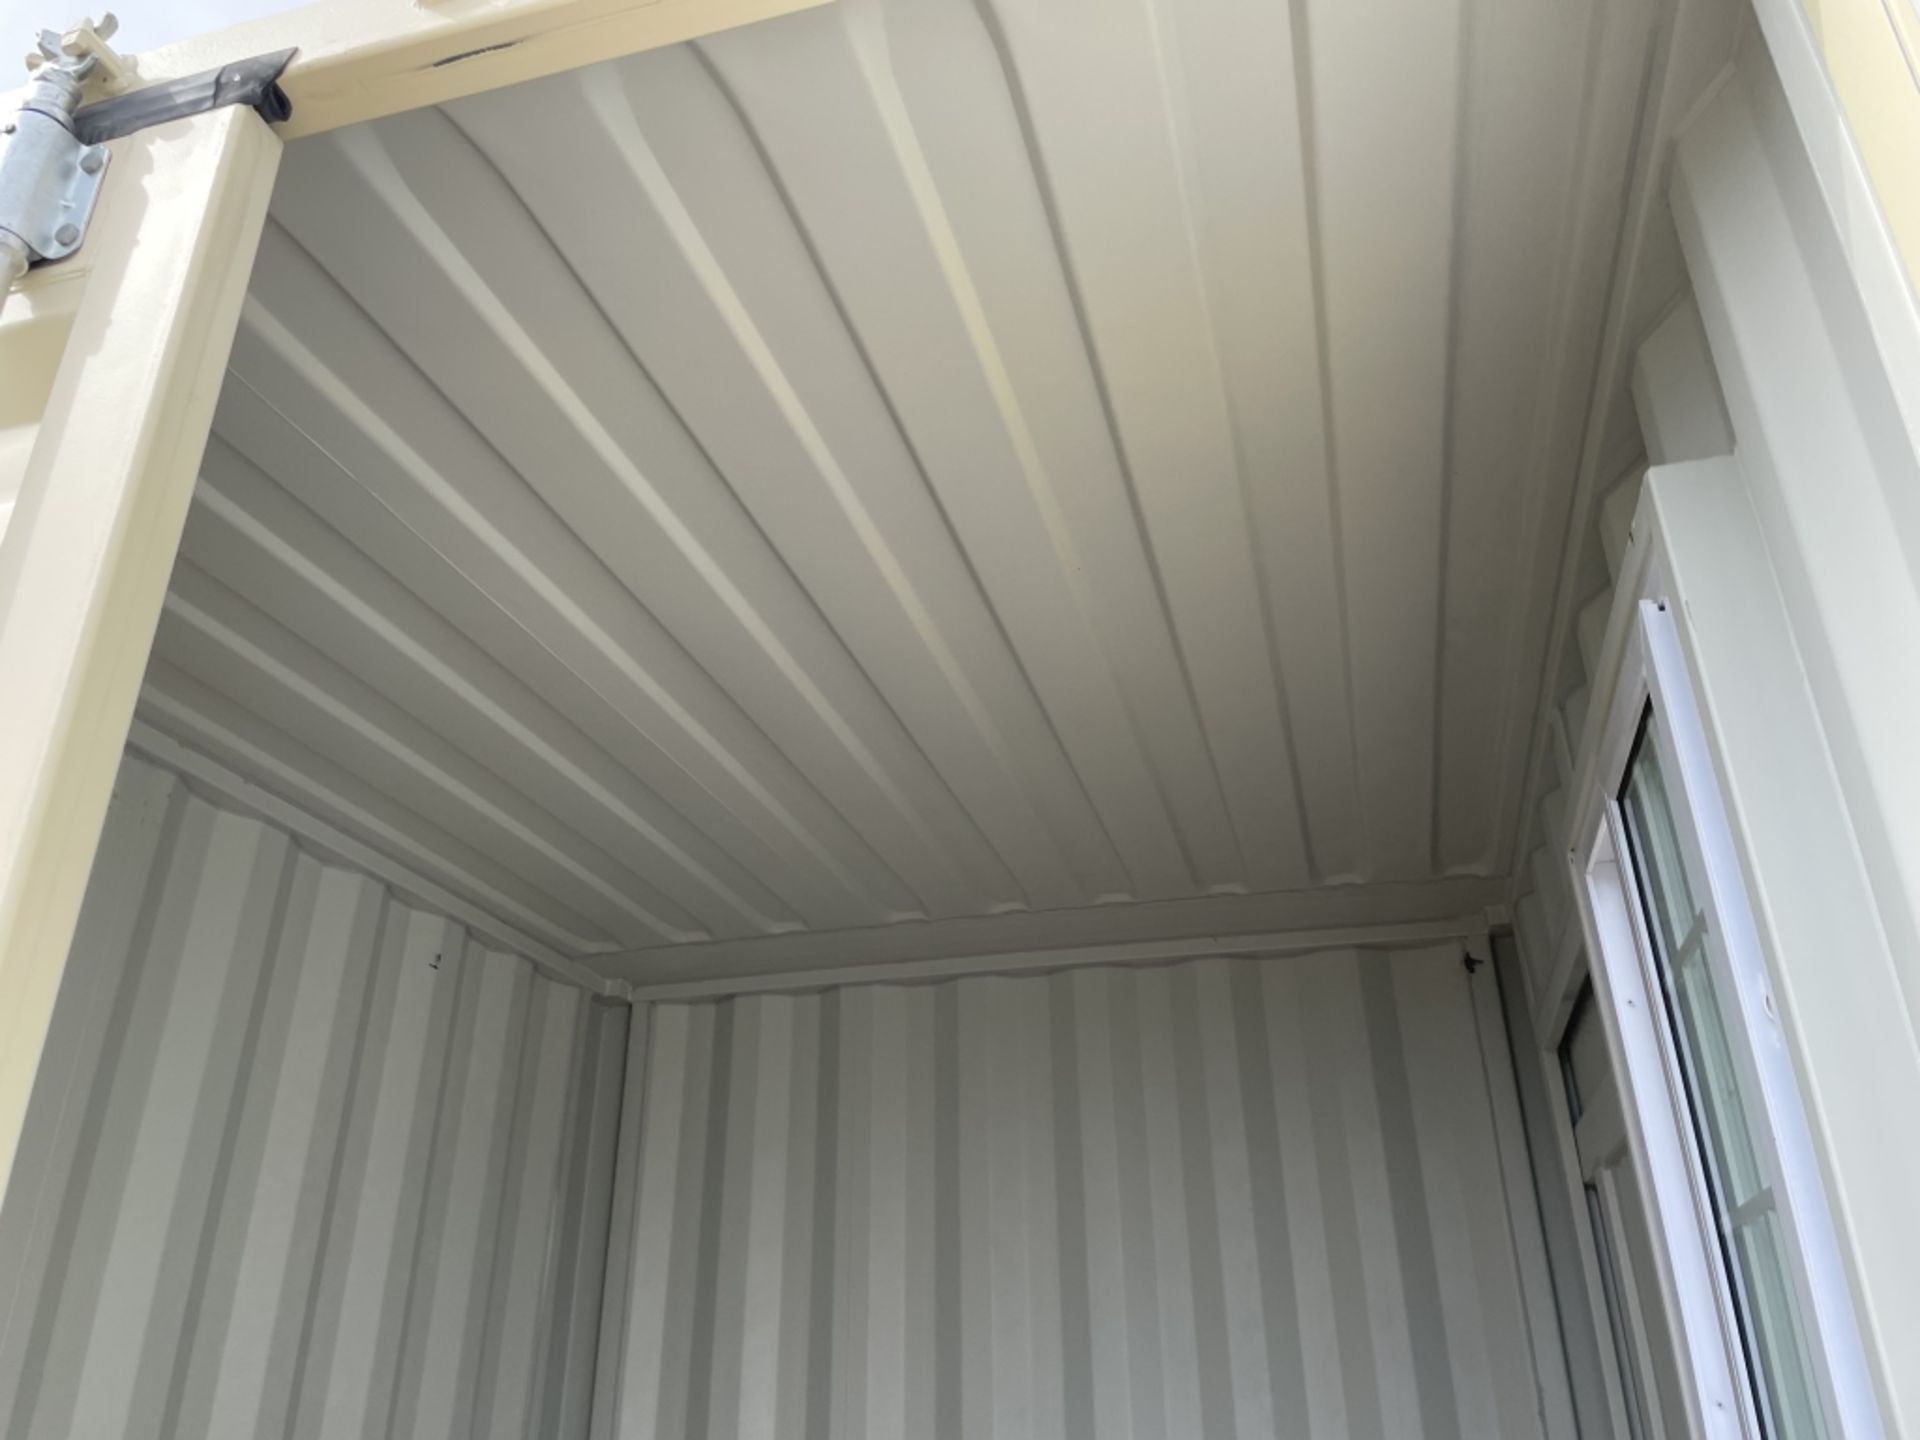 2022 9' Shipping Container - Image 6 of 8